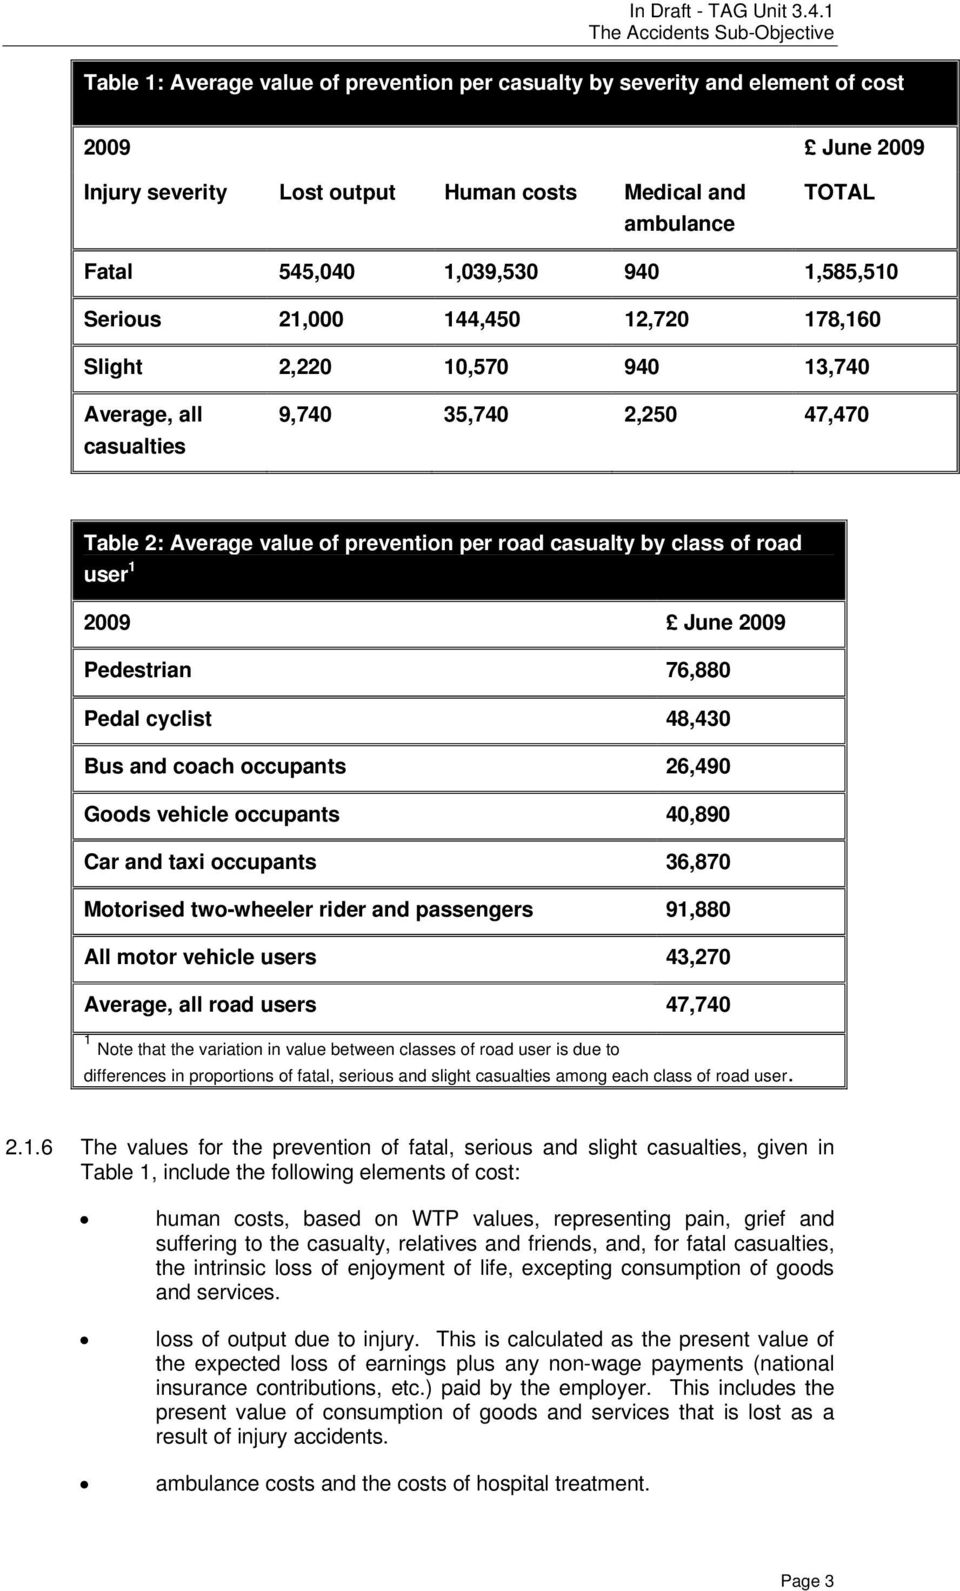 road user 1 2009 June 2009 Pedestrian 76,880 Pedal cyclist 48,430 Bus and coach occupants 26,490 Goods vehicle occupants 40,890 Car and taxi occupants 36,870 Motorised two-wheeler rider and